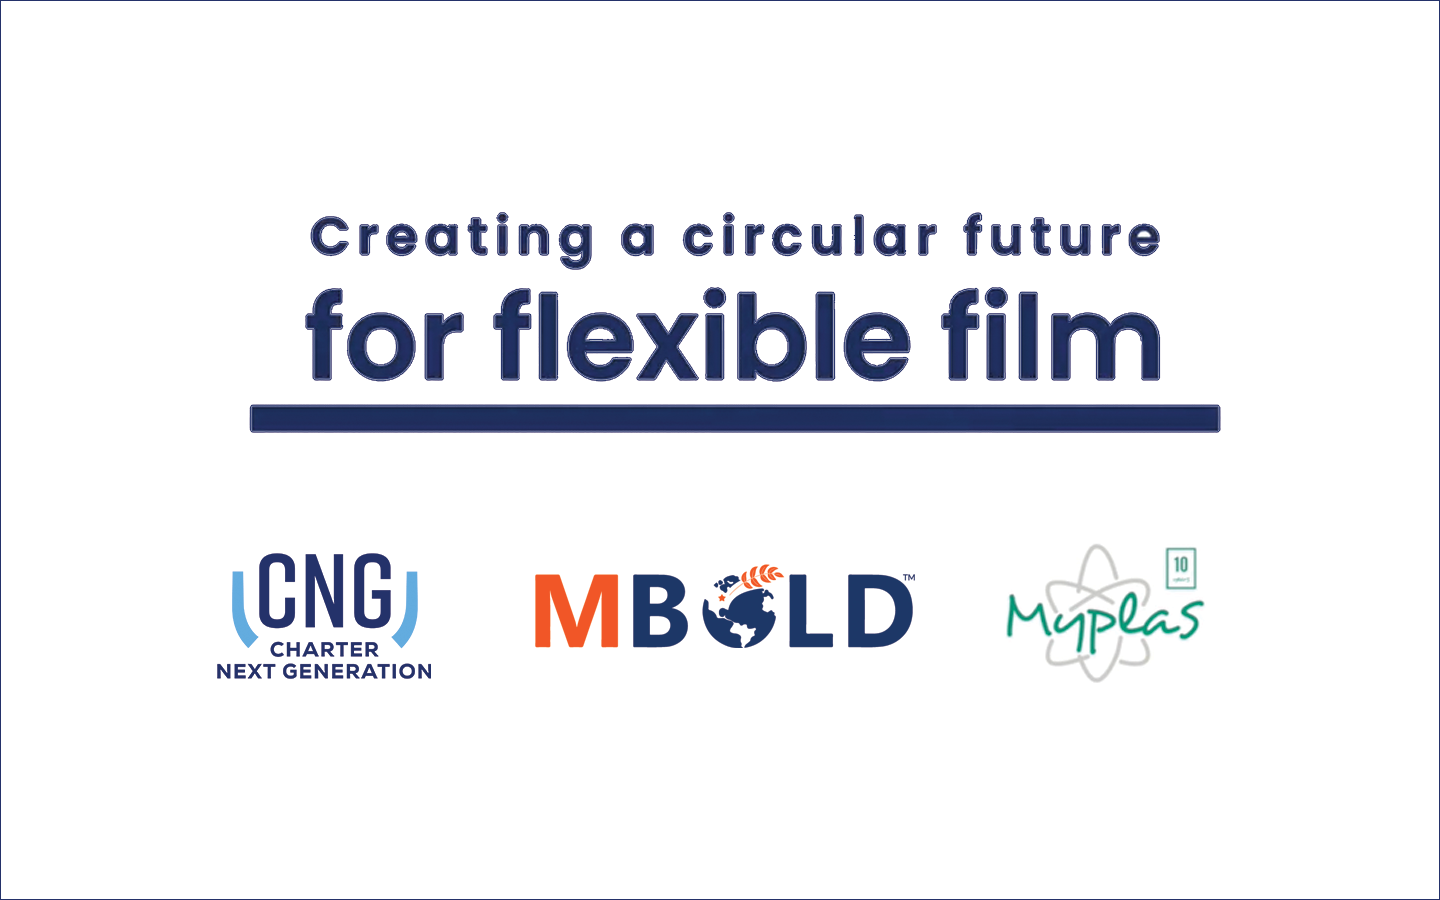 MBOLD coalition catalyzes new ecosystem to support a circular economy for flexible packaging and films in the Upper Midwest